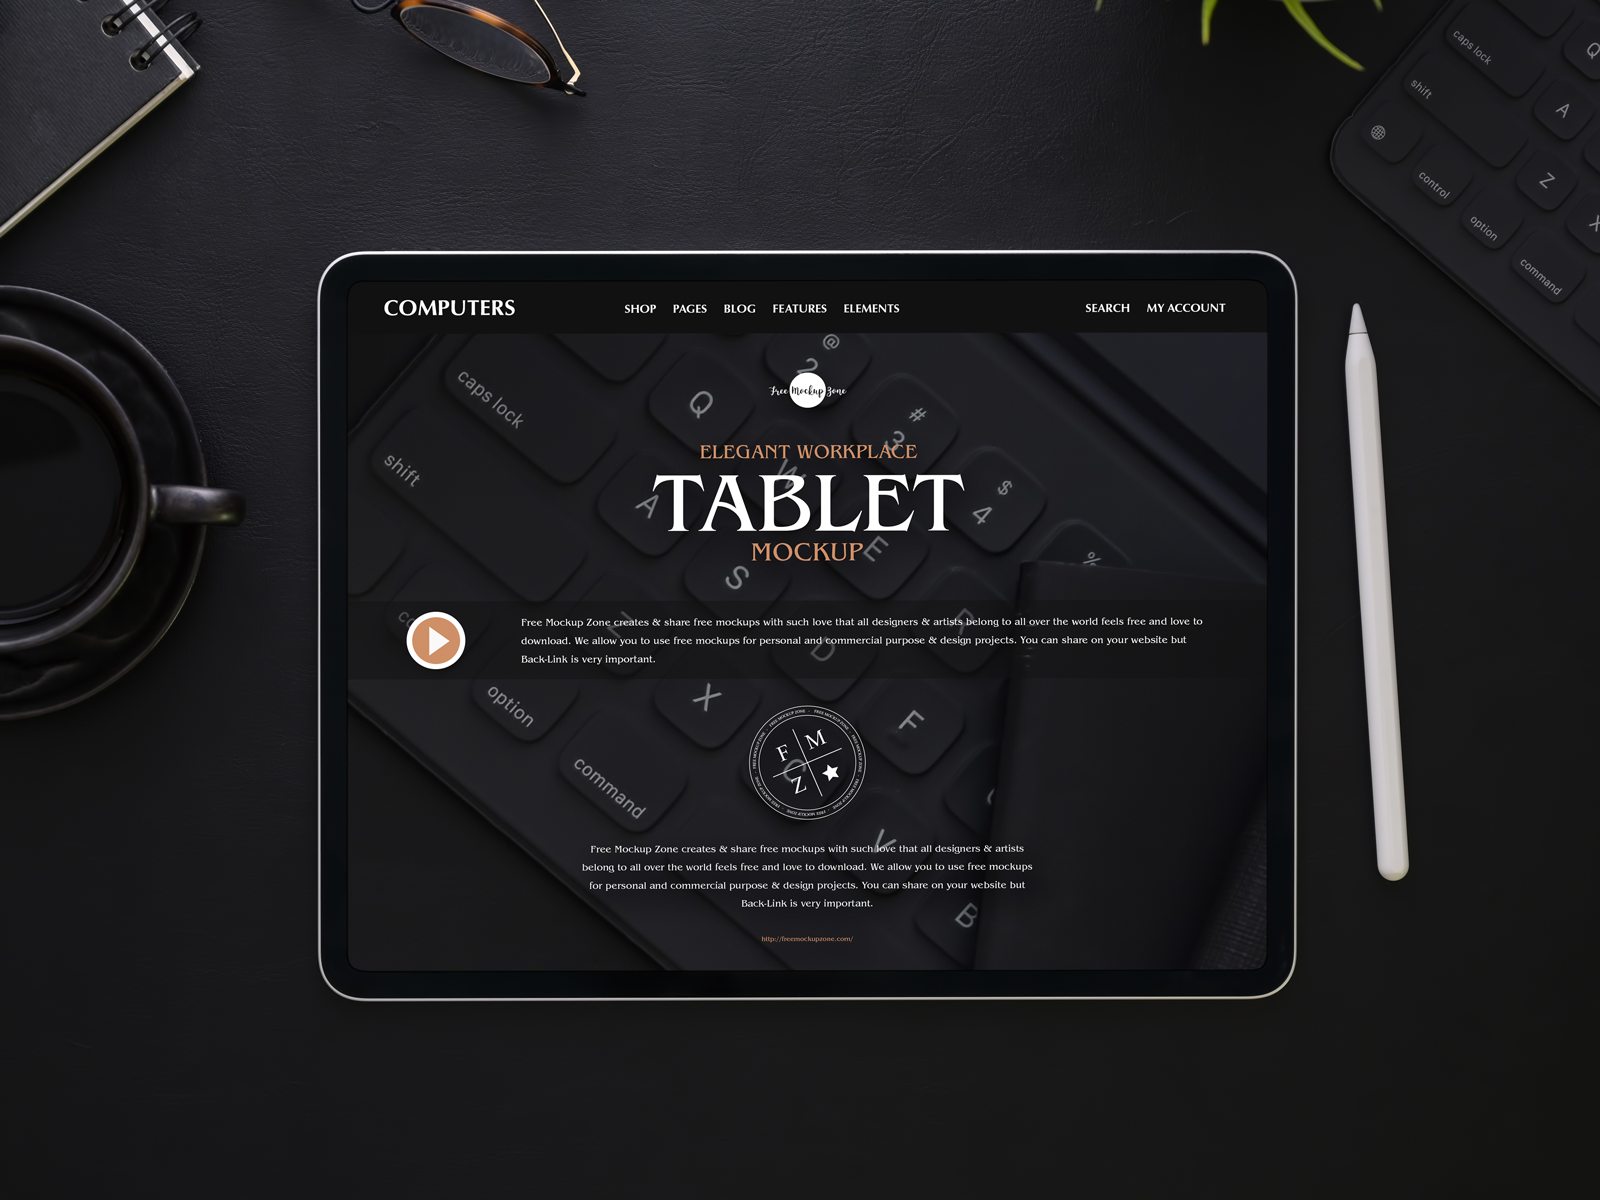 Download Free Elegant Workplace Tablet Mockup By Free Mockup Zone On Dribbble